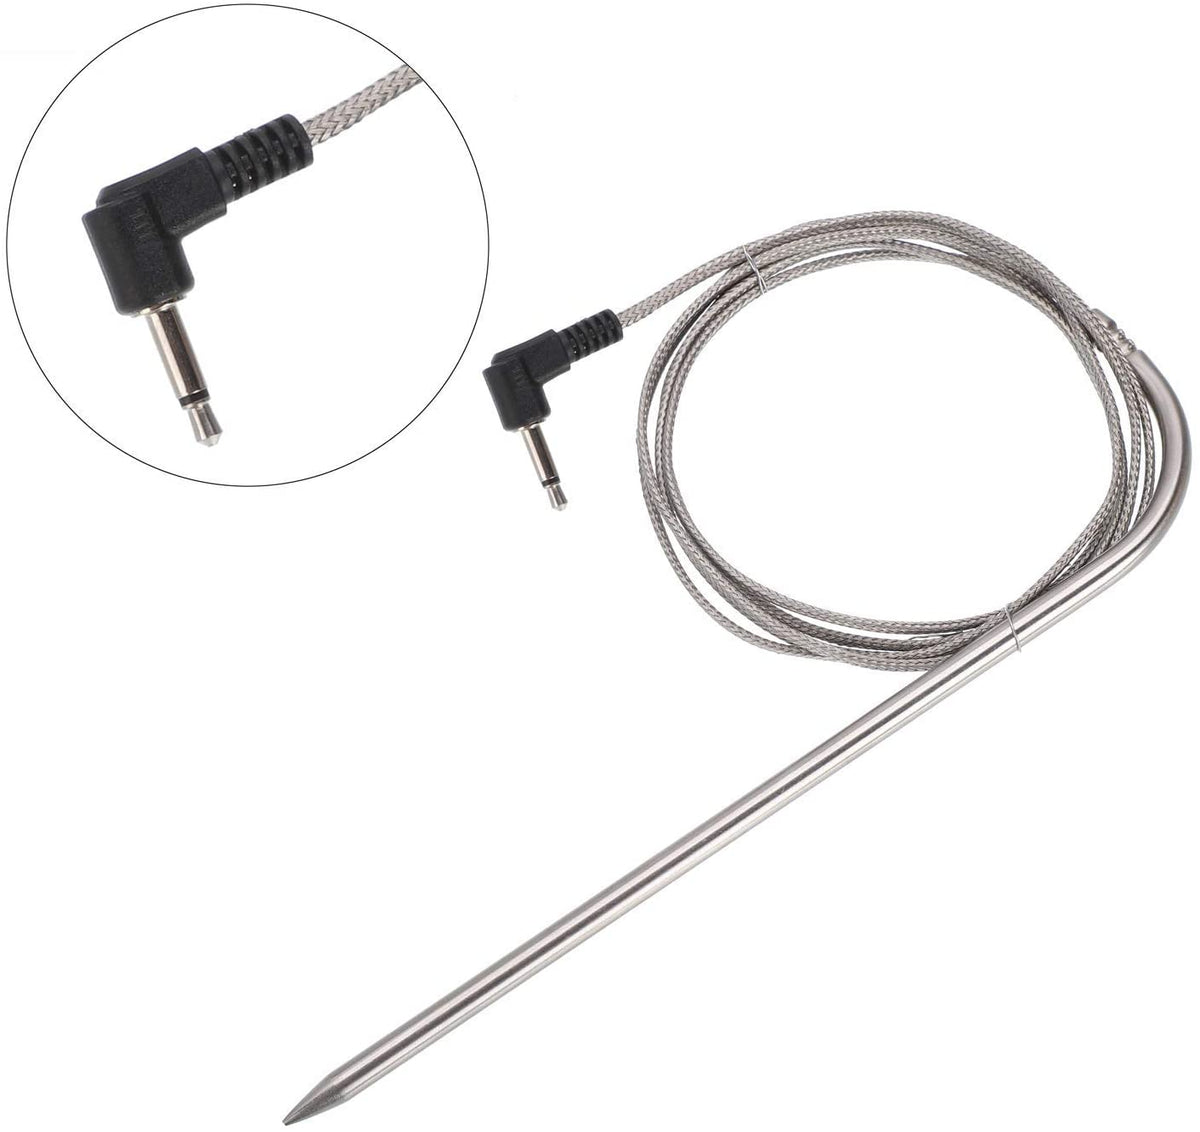 Waterproof Thermometers Hybrid Probe Replacements for Thermopro